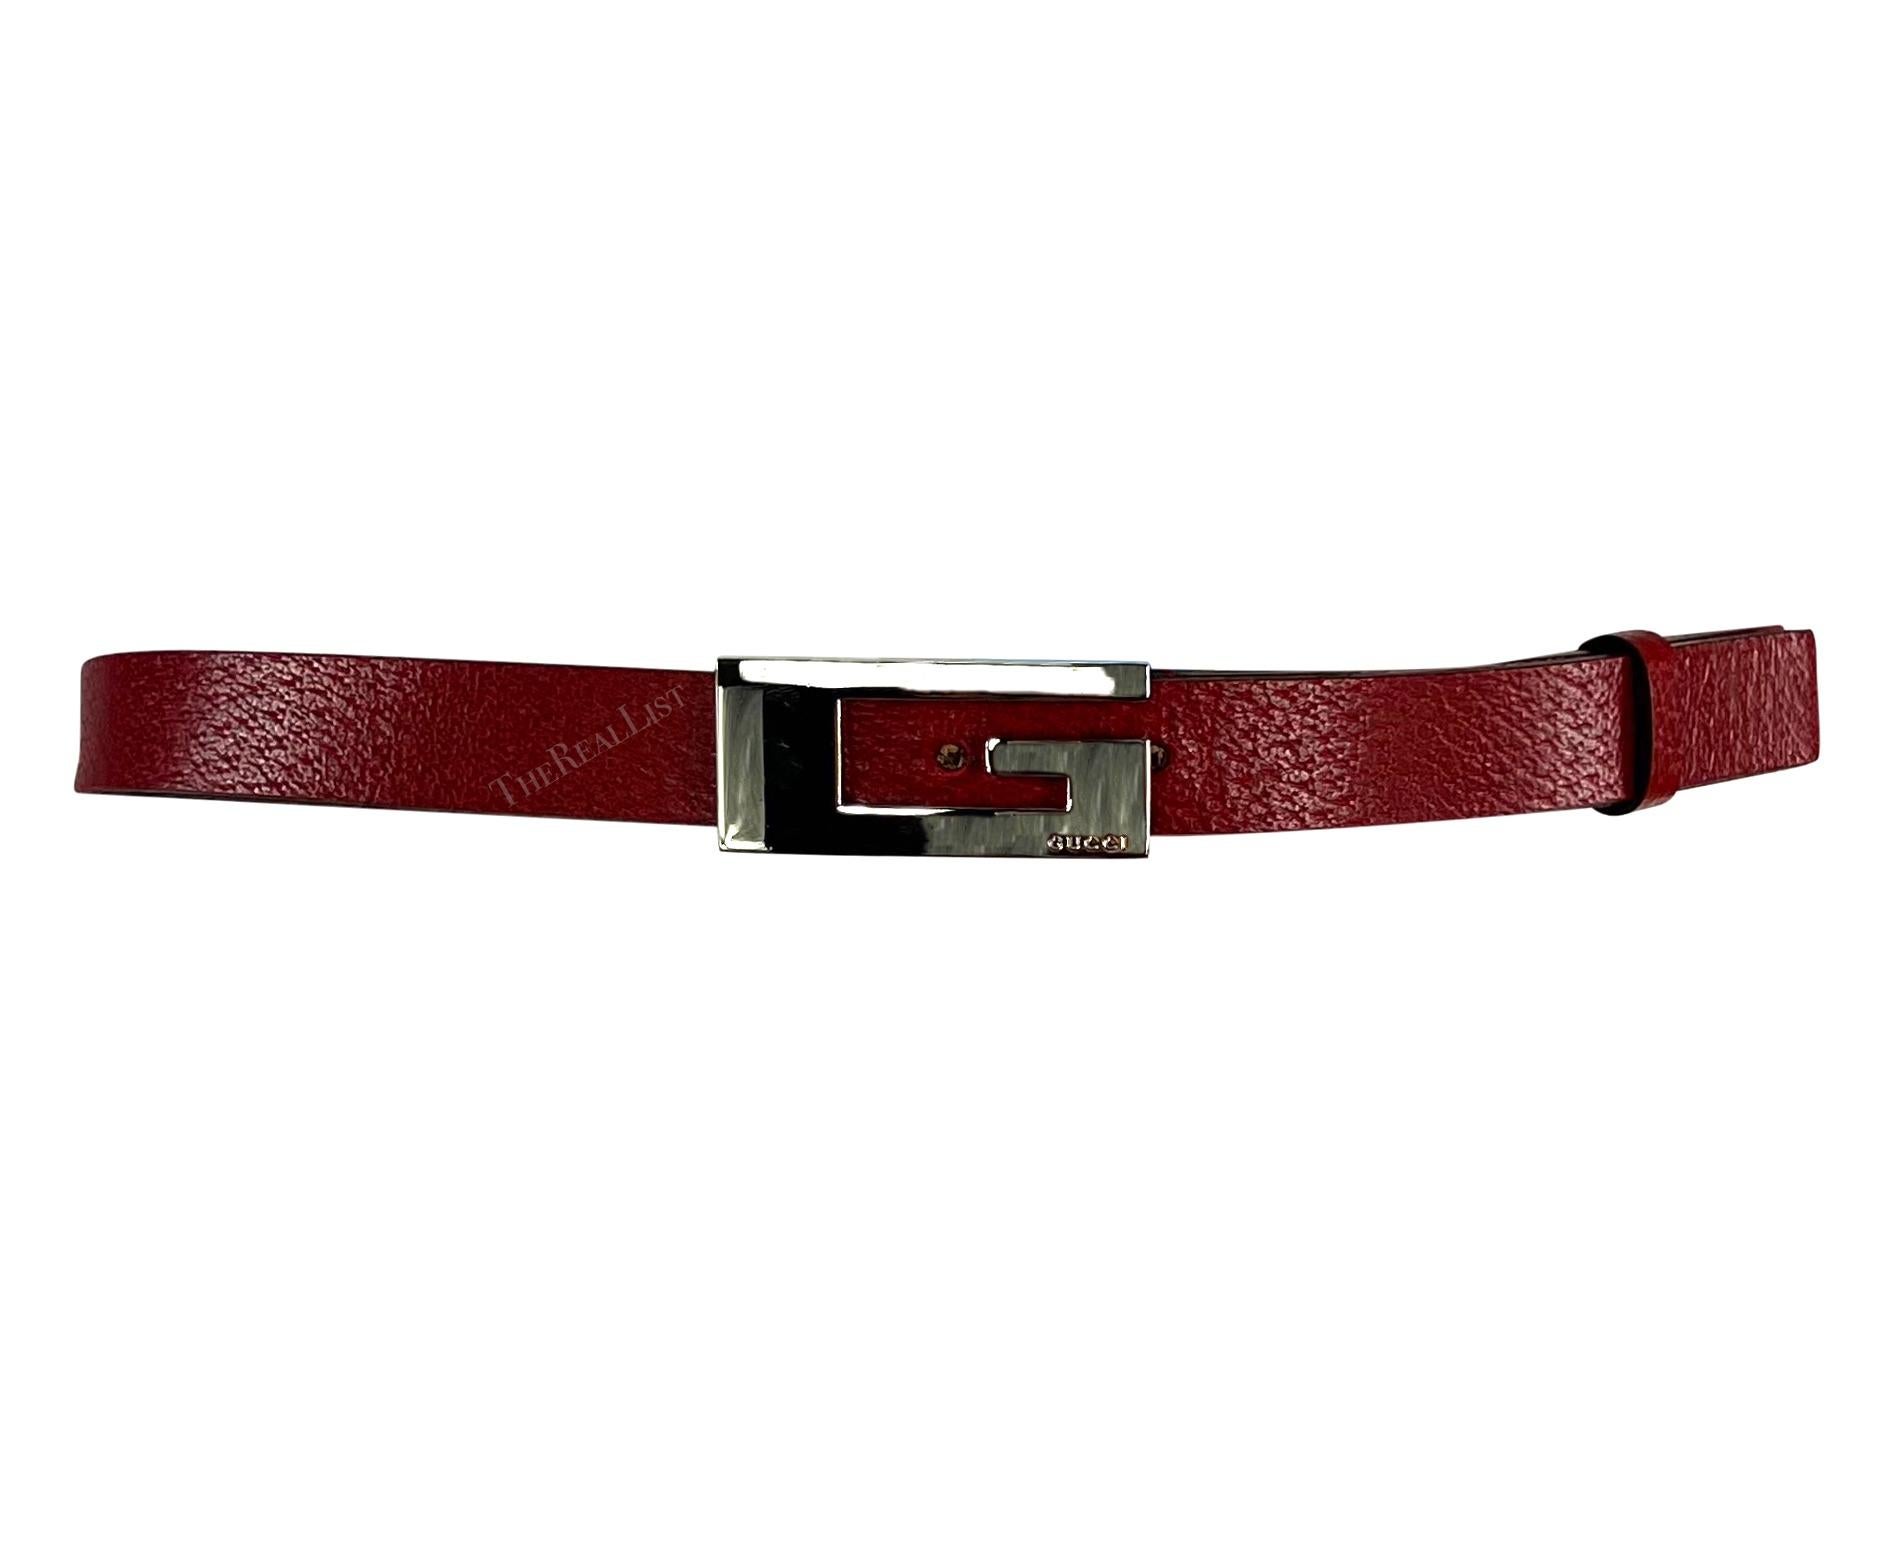 From the late 1990s, this thin leather Gucci belt was designed by Tom Ford. It features a slender design in red leather, accentuated by a distinctive square silver metal 'G' buckle at the front. 

Approximate measurements: 
Size - not listed
Width: 